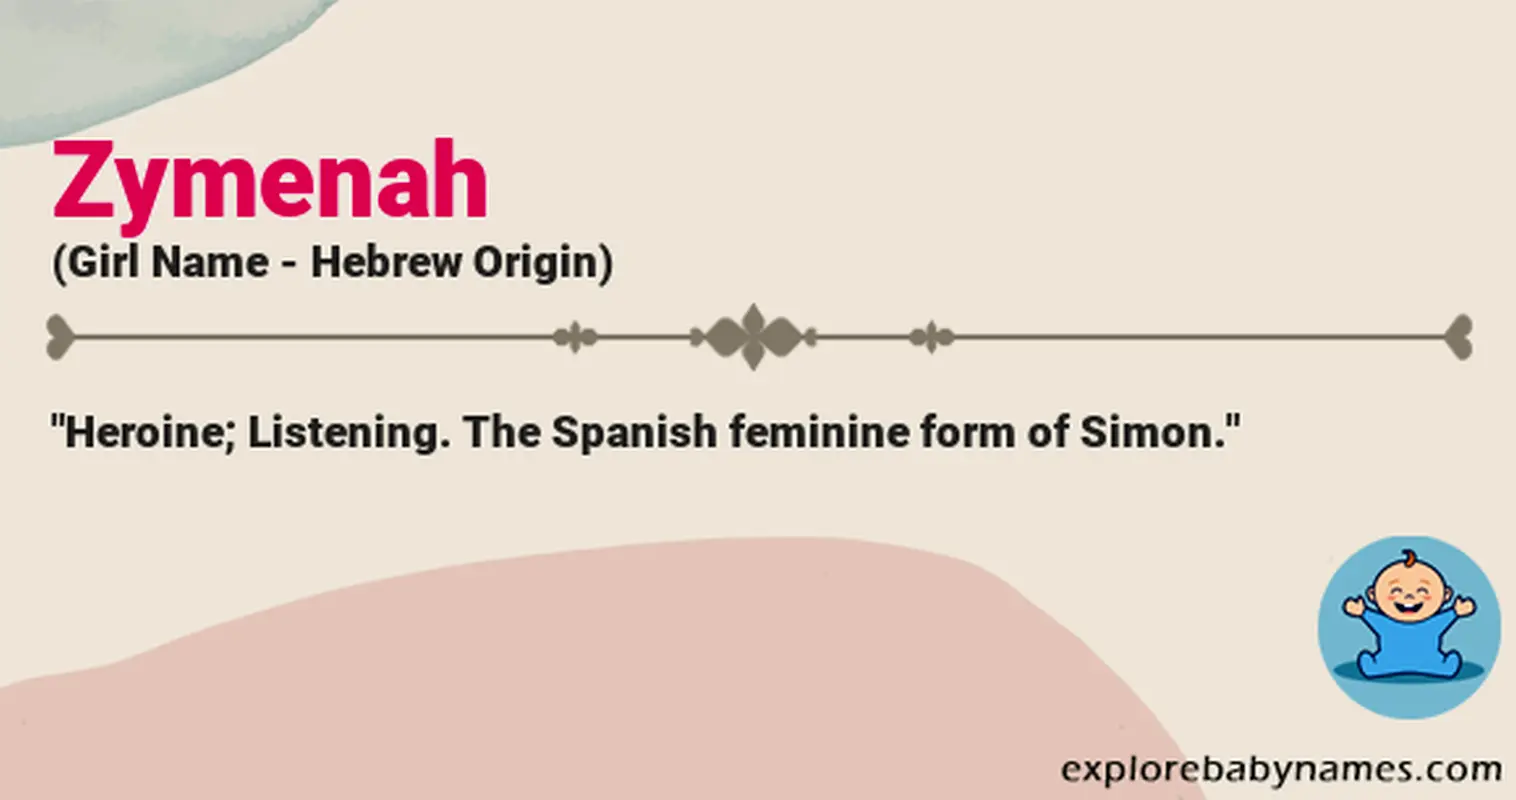 Meaning of Zymenah